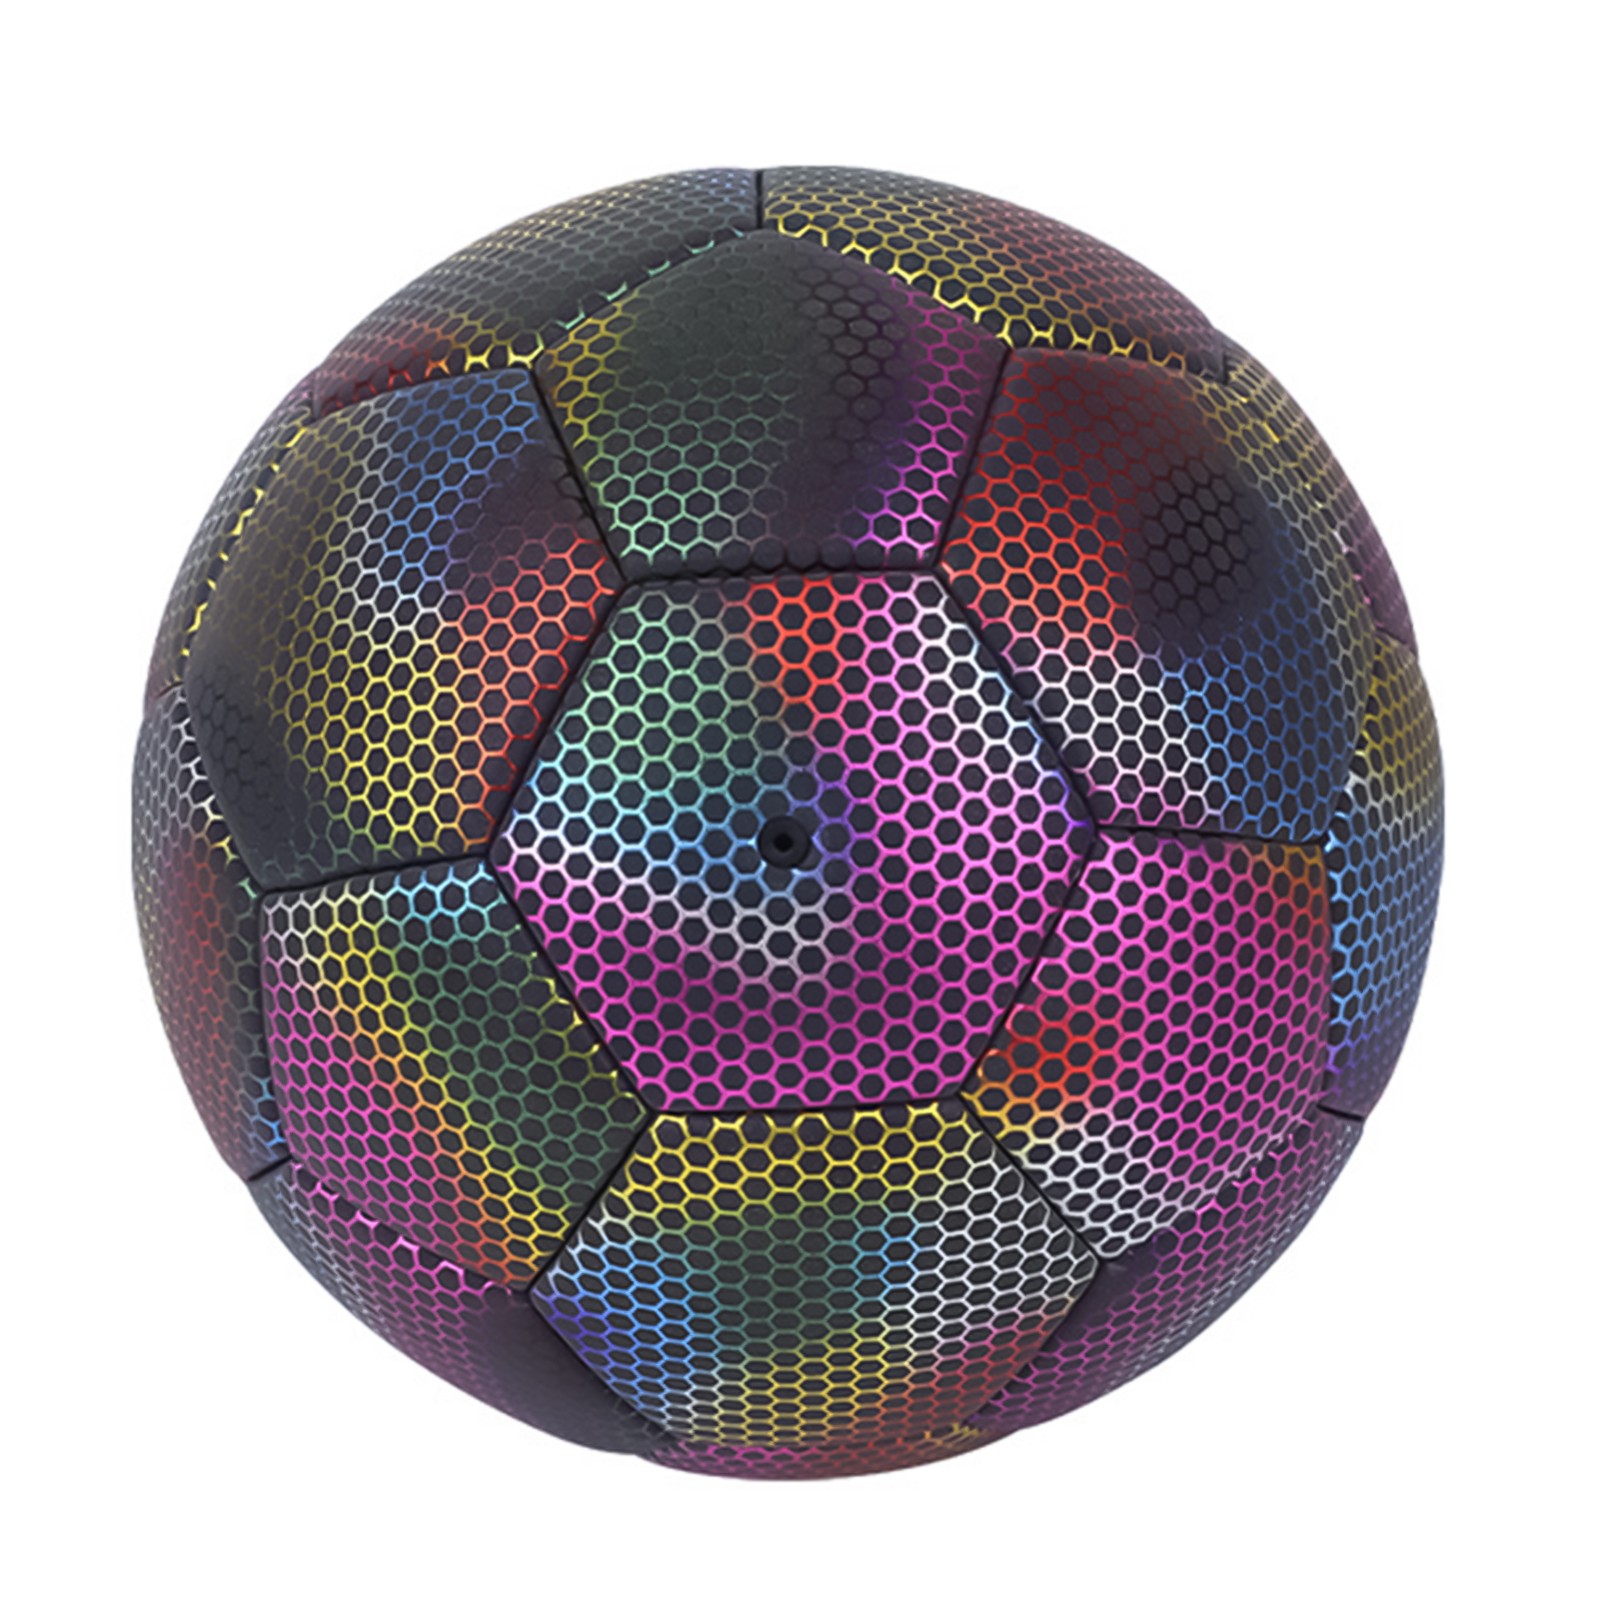 Auniq Reflective Football Soft Sponge Holographic Glowing Training Football Reflective Soccer Ball Size 5 Personalised Luminous Football with Mesh Bag and Gas Needle for Day and Night Training